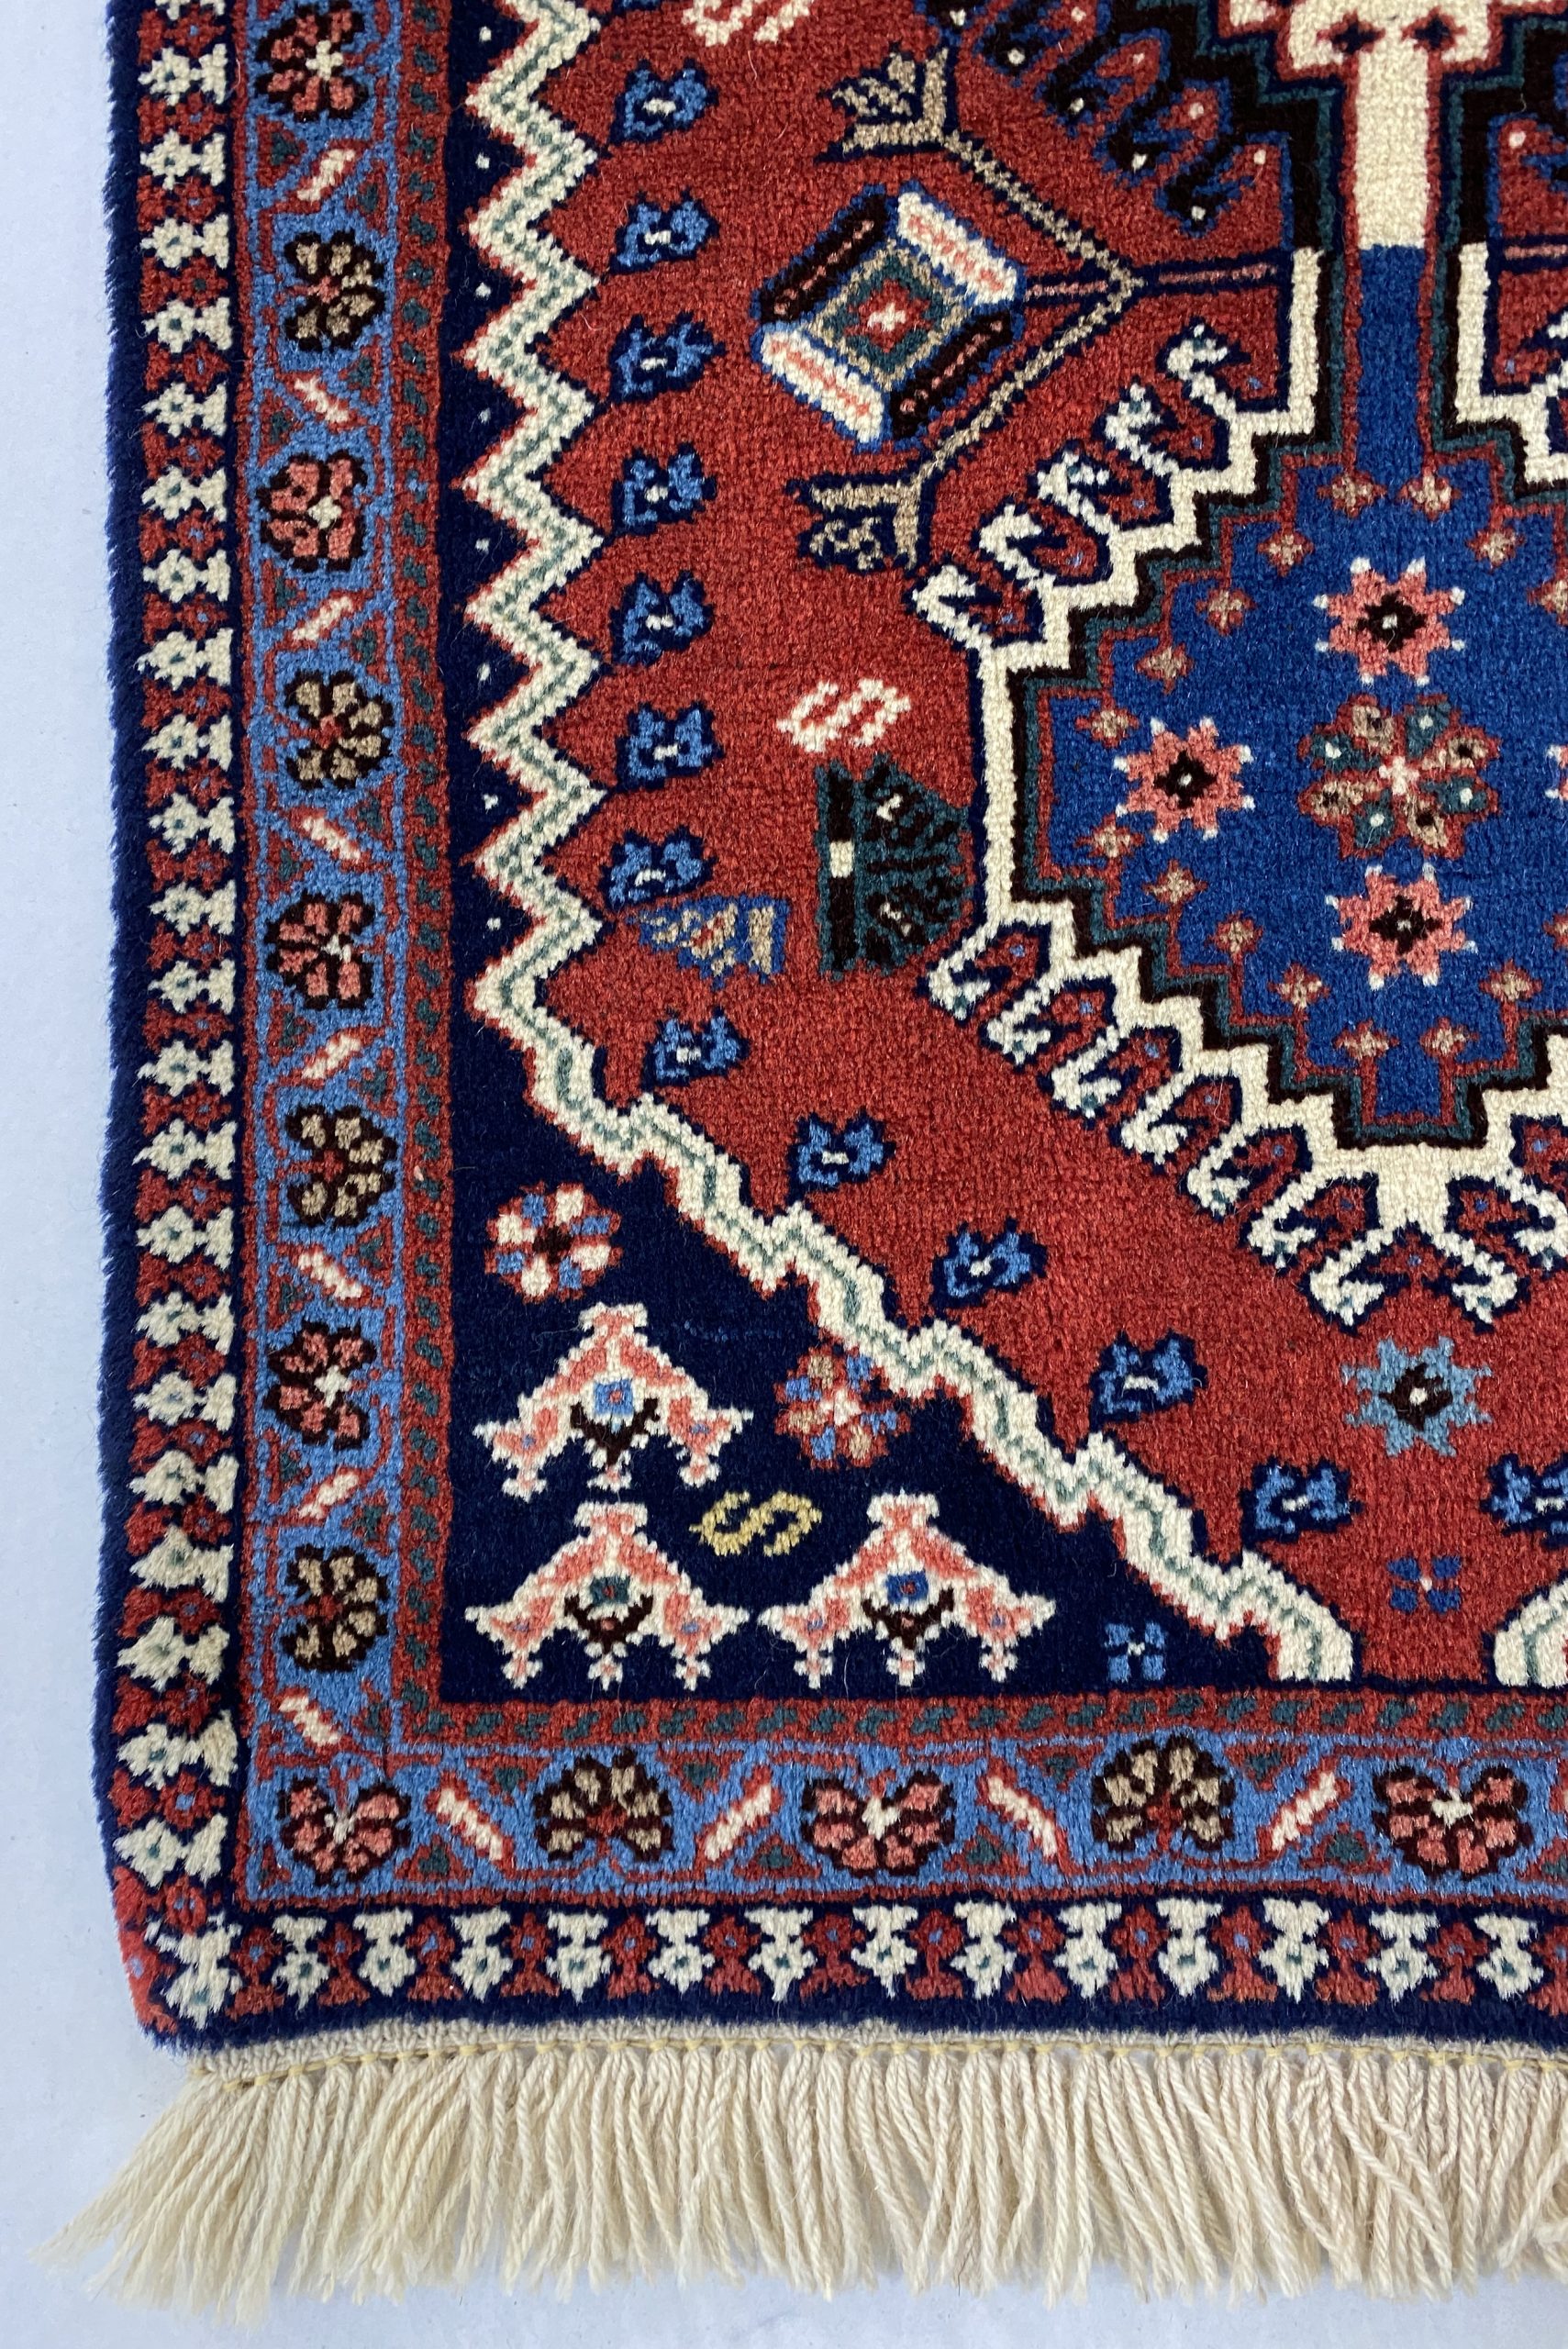 Rug# 10084, Aliabad Yalameh, vegtable dyes, Qashqai weave, south Persia, size 97x58 cm (4)